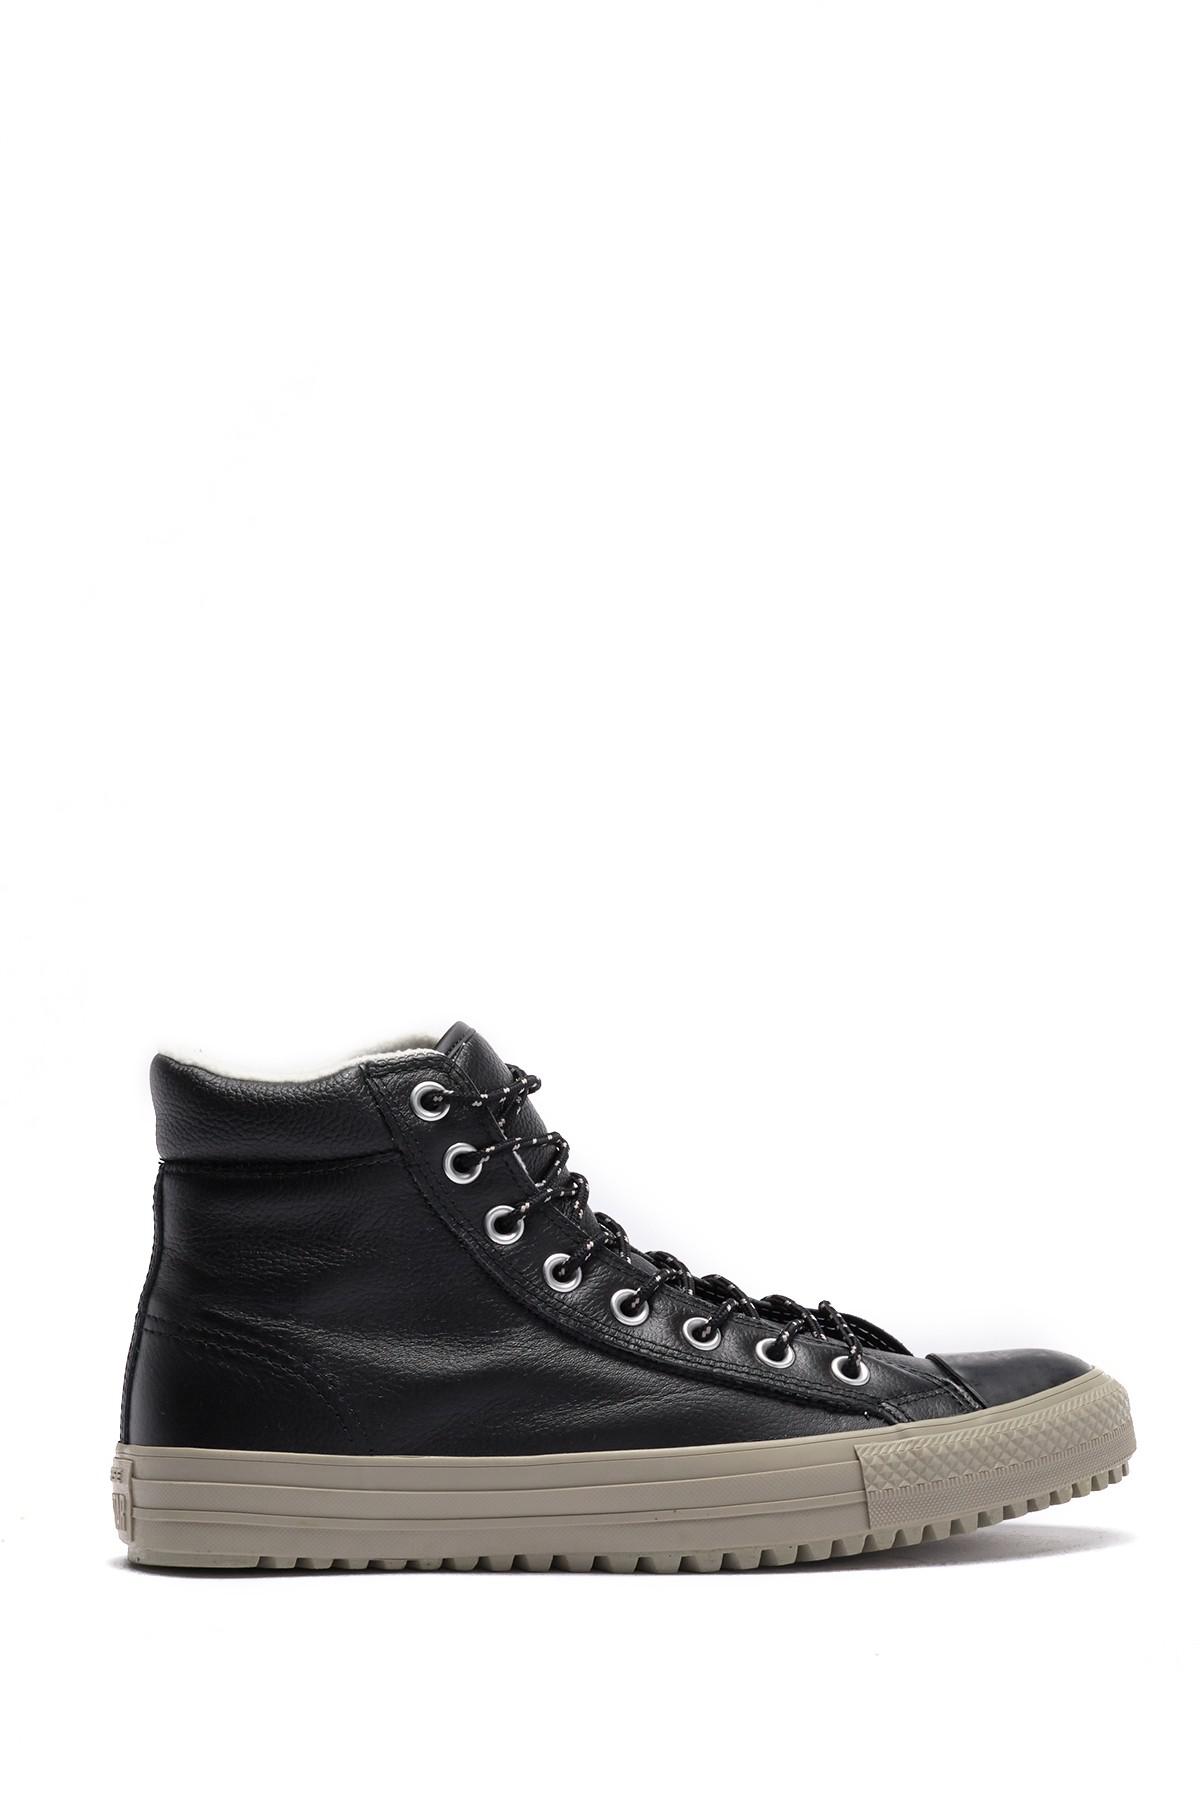 converse chuck taylor pc leather high top